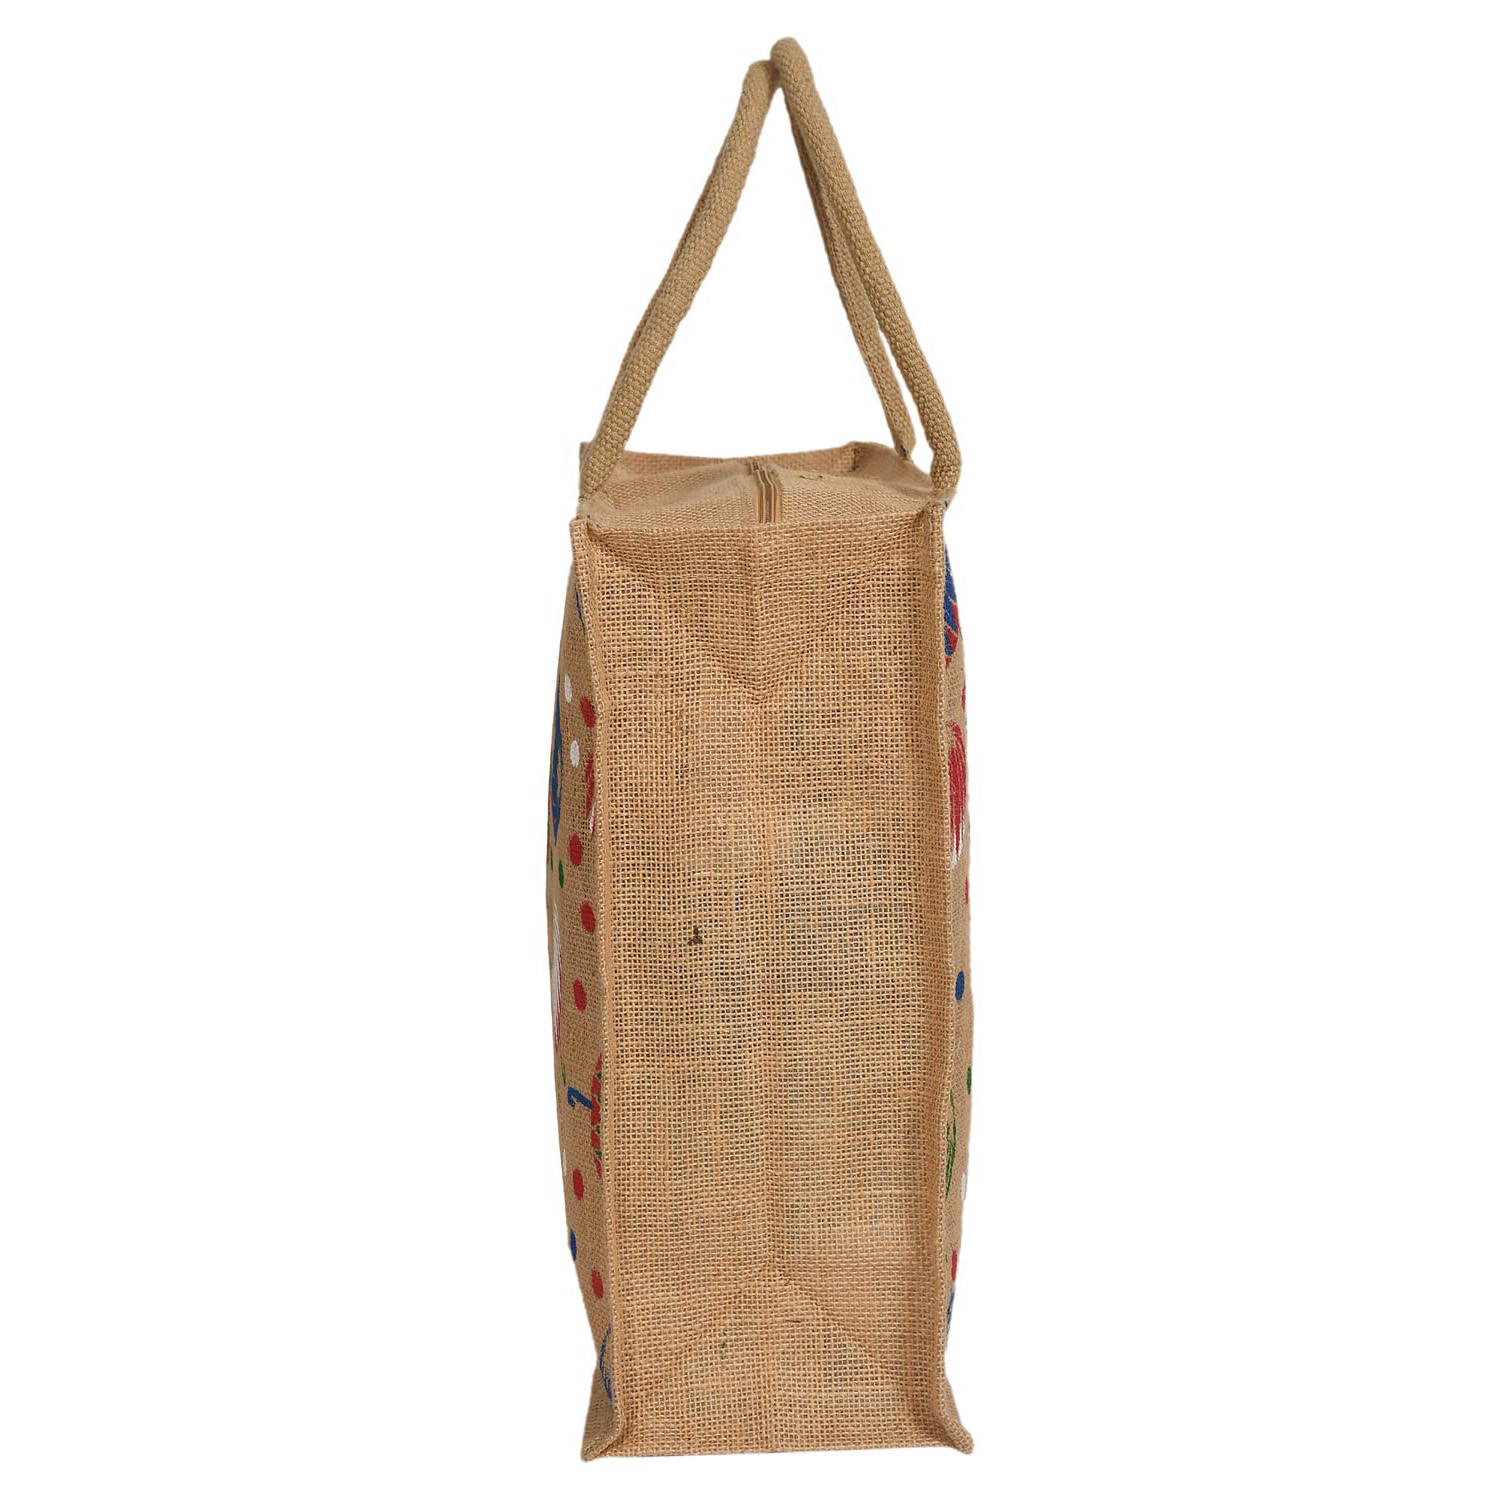 Kuber Industries Shopping Bag|Jute Eco-Friendly & Reusable Grocery Bag|Hand Bag Umbrella Print With Zip & Handle for Daily Use|16x15 Inch (Brown)